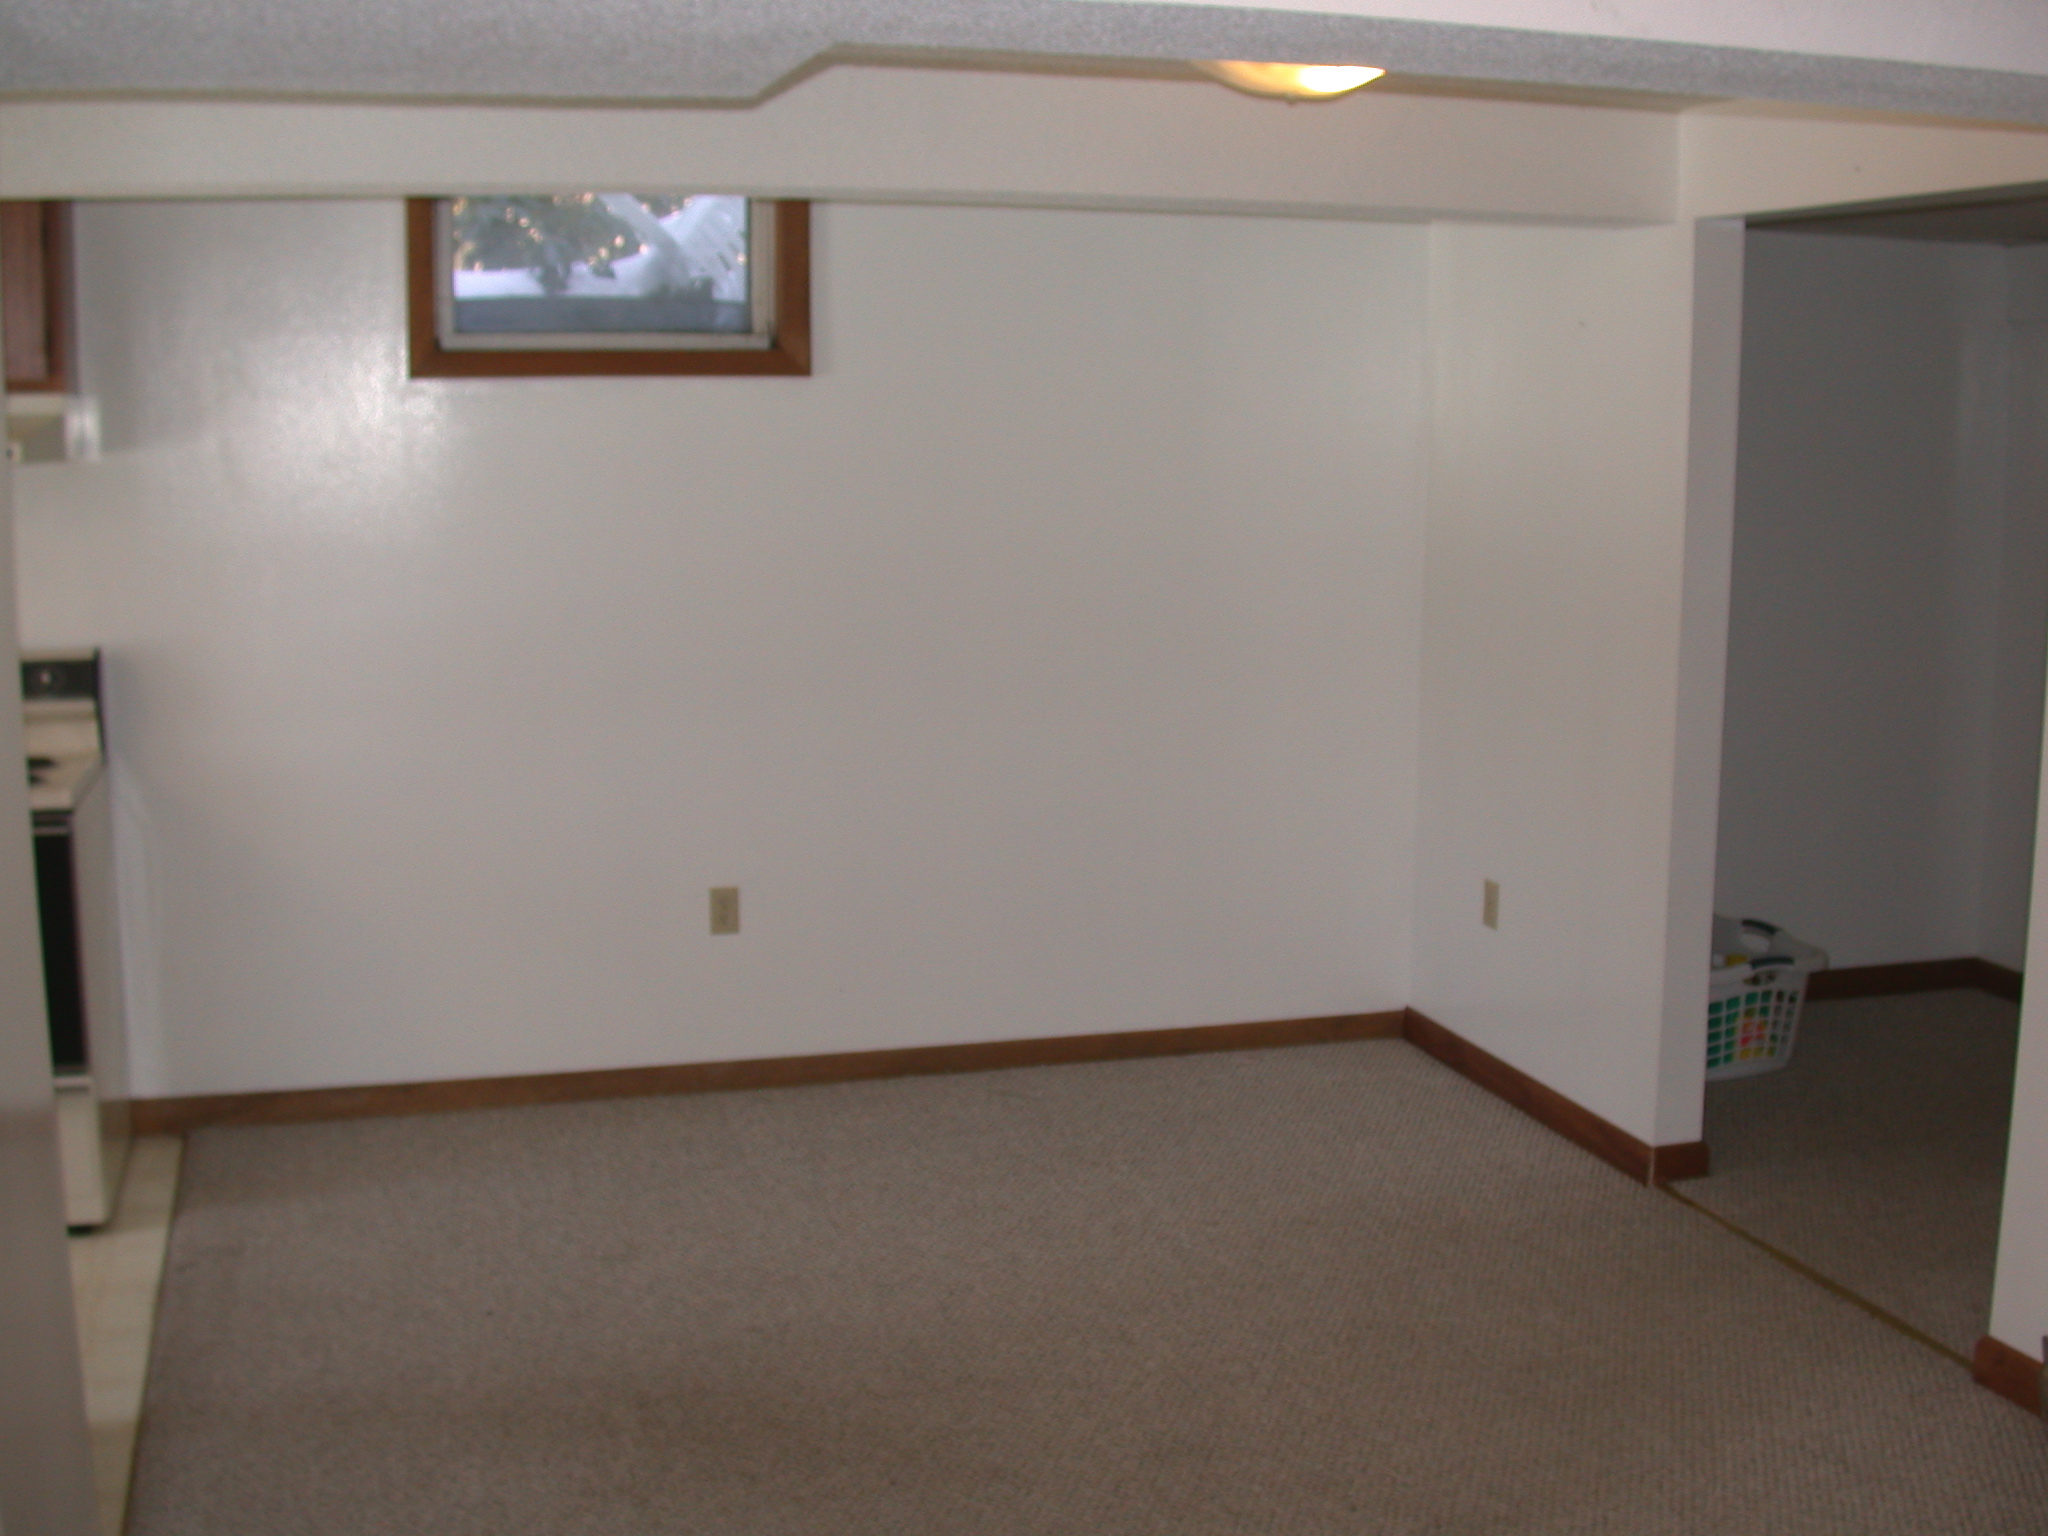 View of Left Side of Living Room